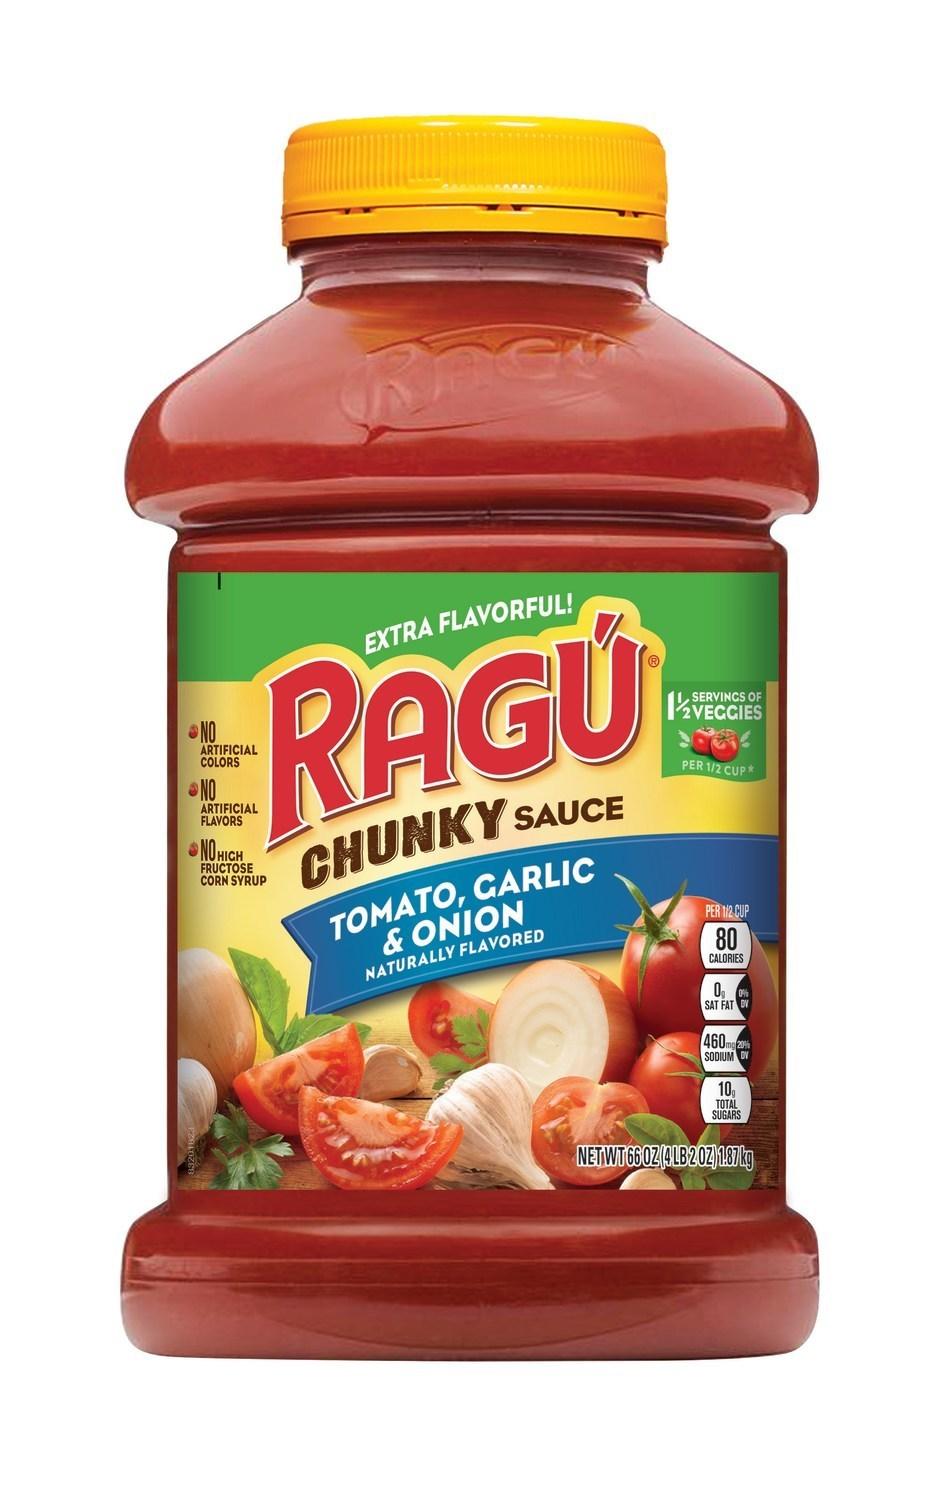 Some Ragu sauces were recalled because they may contain pieces of plastic. (Mizkan America)